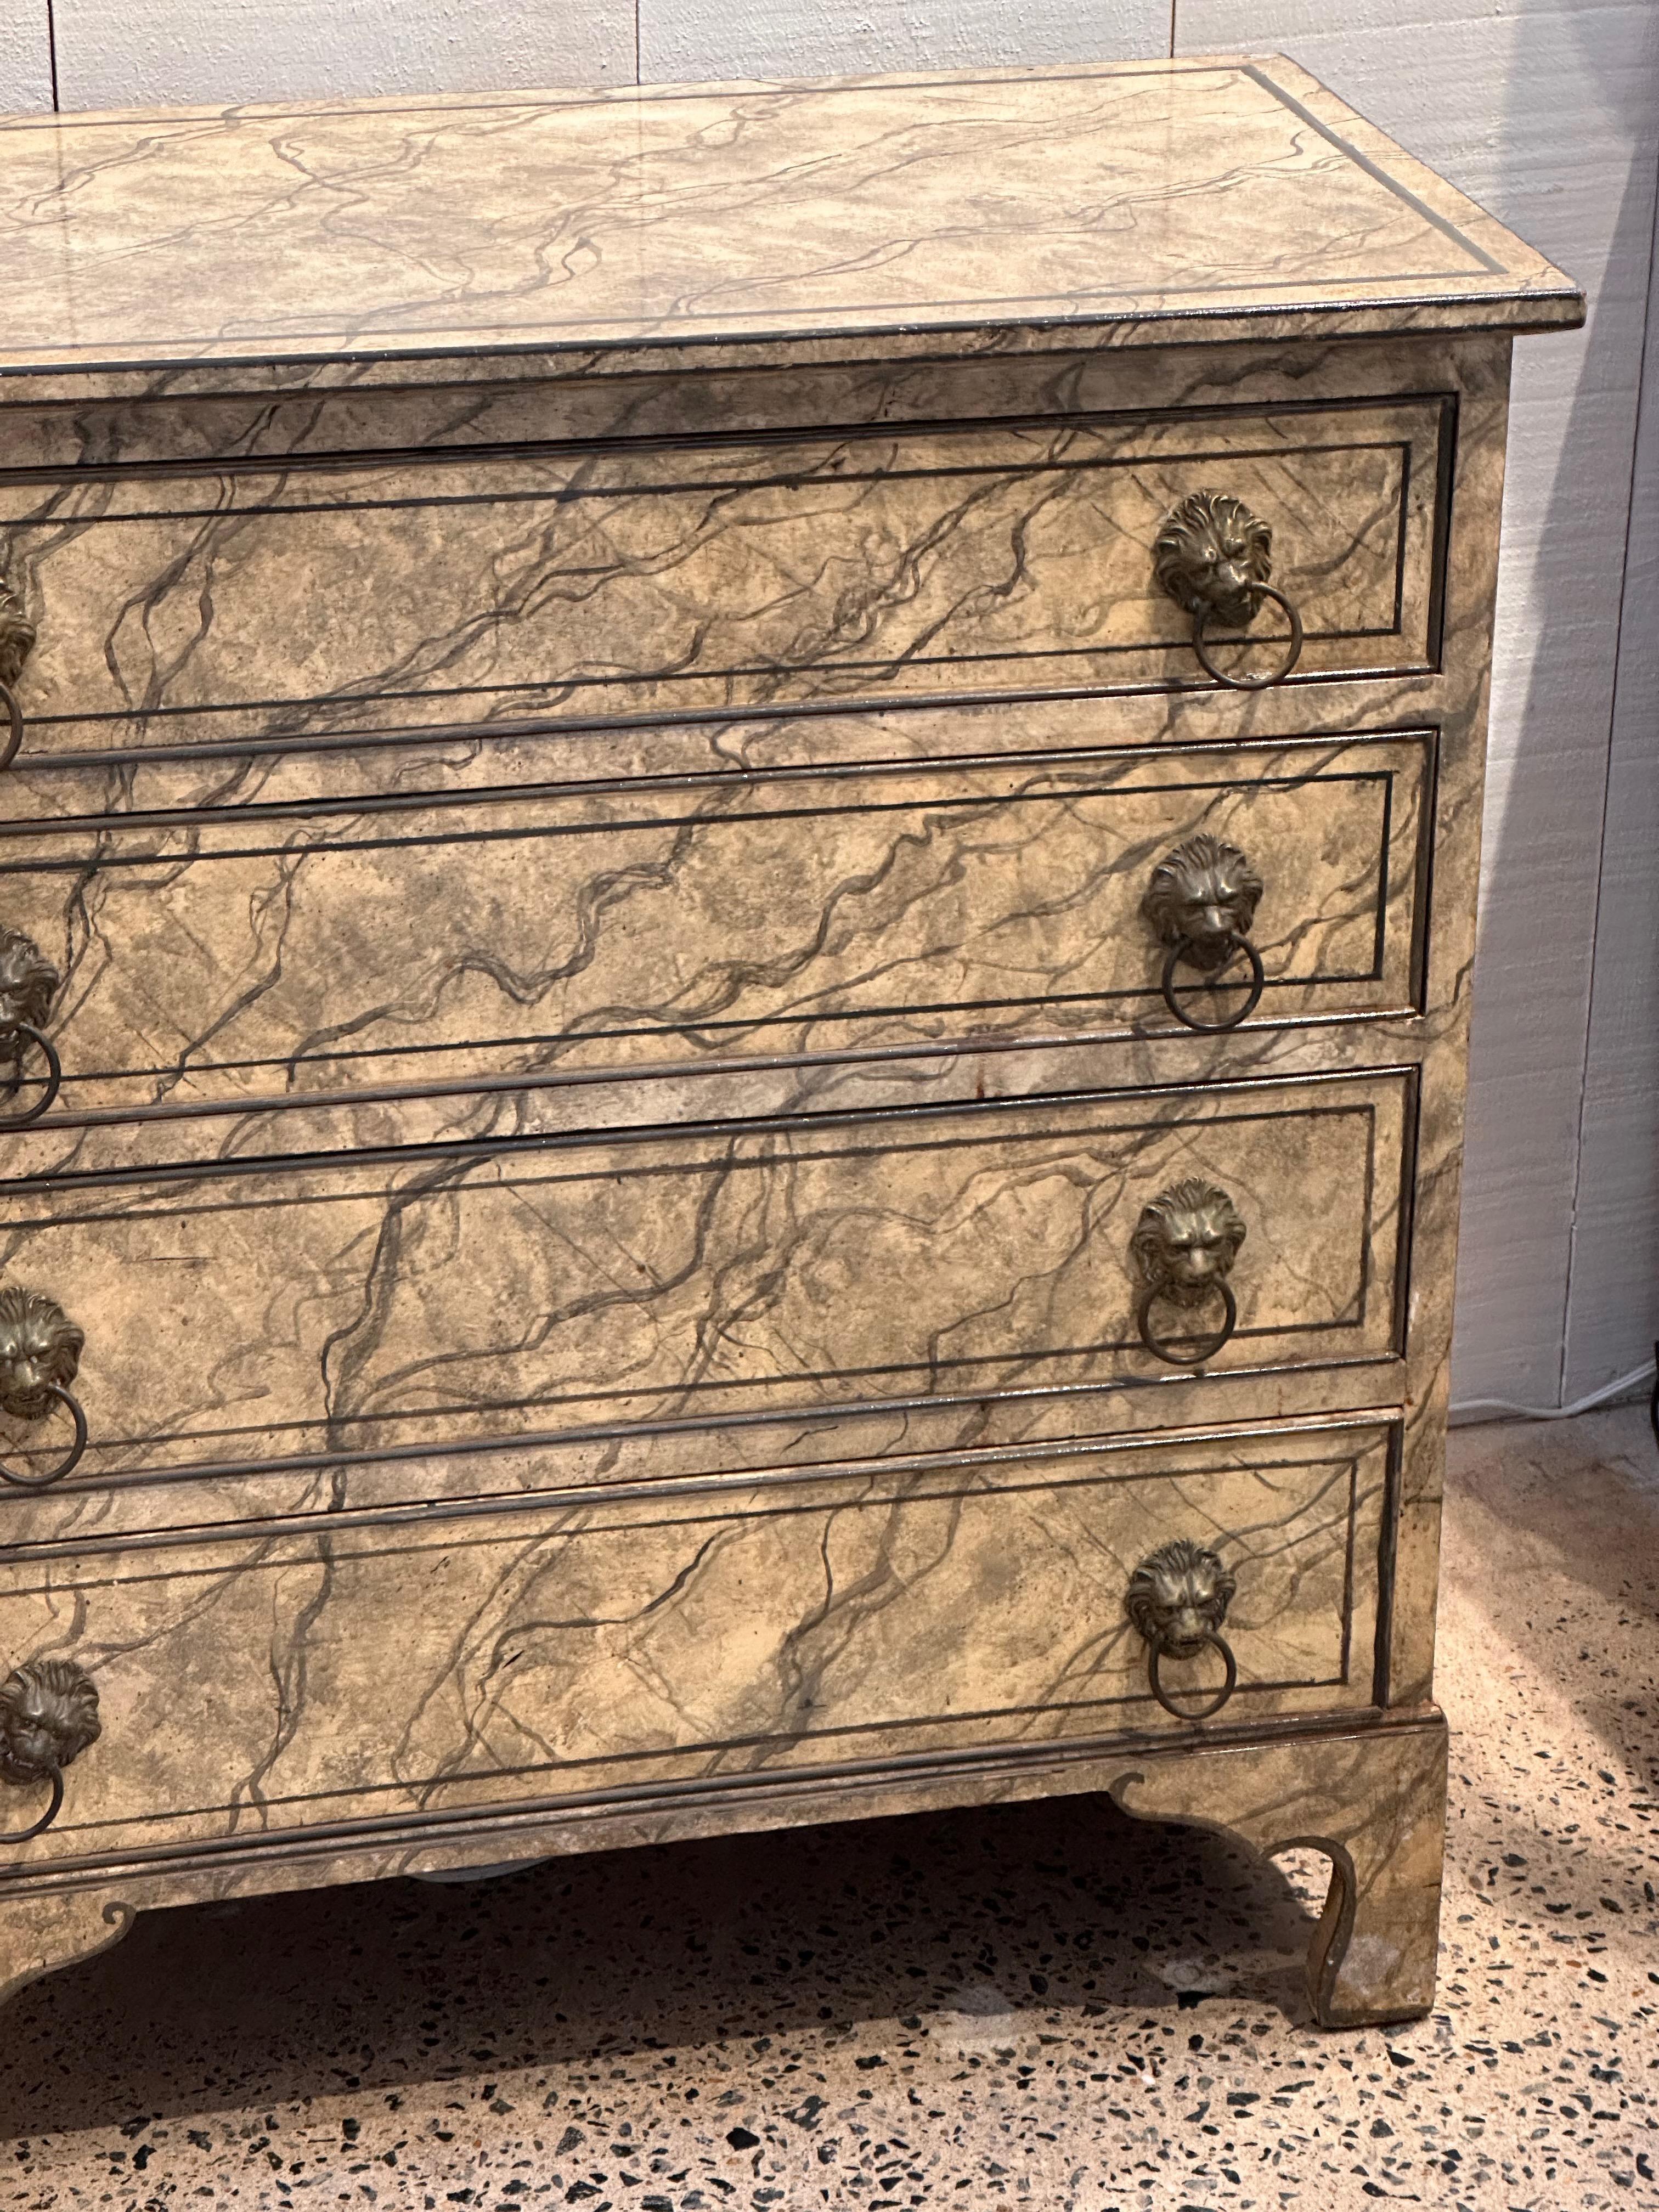 This chest has been decorated with faux marble paint.